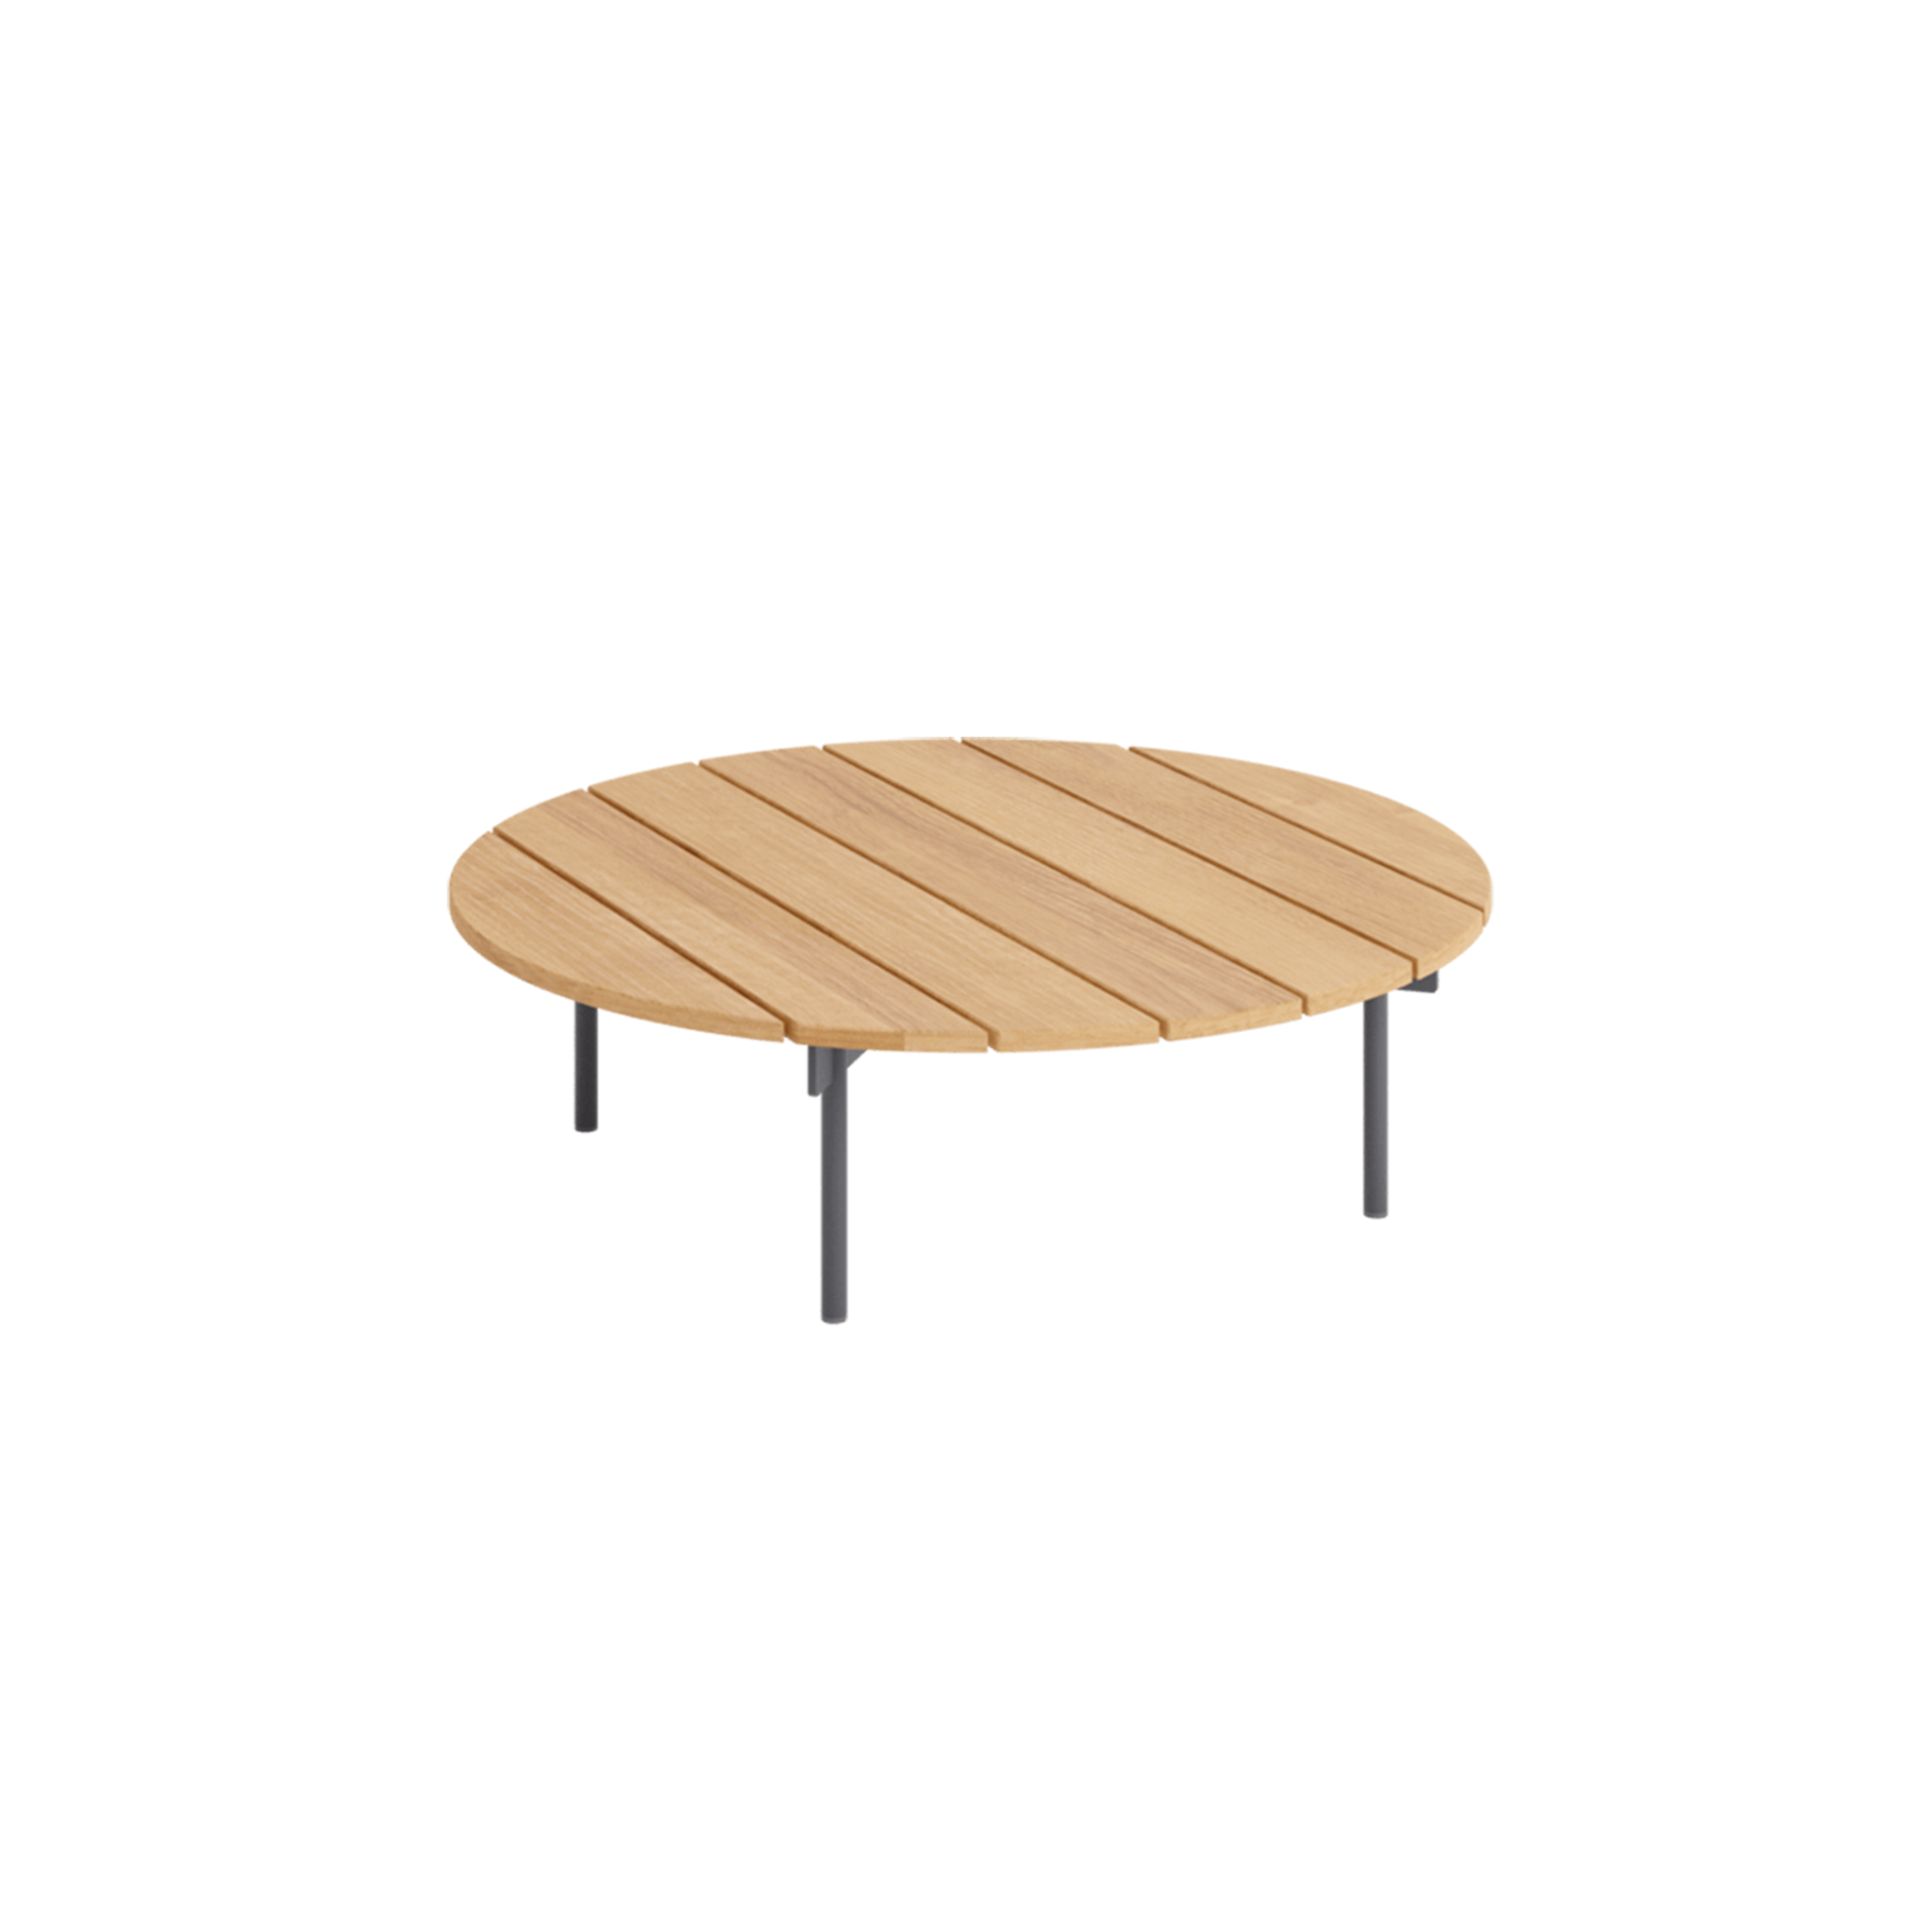 Designer Outdoor Coffee Tables Australia | Robert Plumb Throughout Outdoor Half Round Coffee Tables (View 14 of 20)